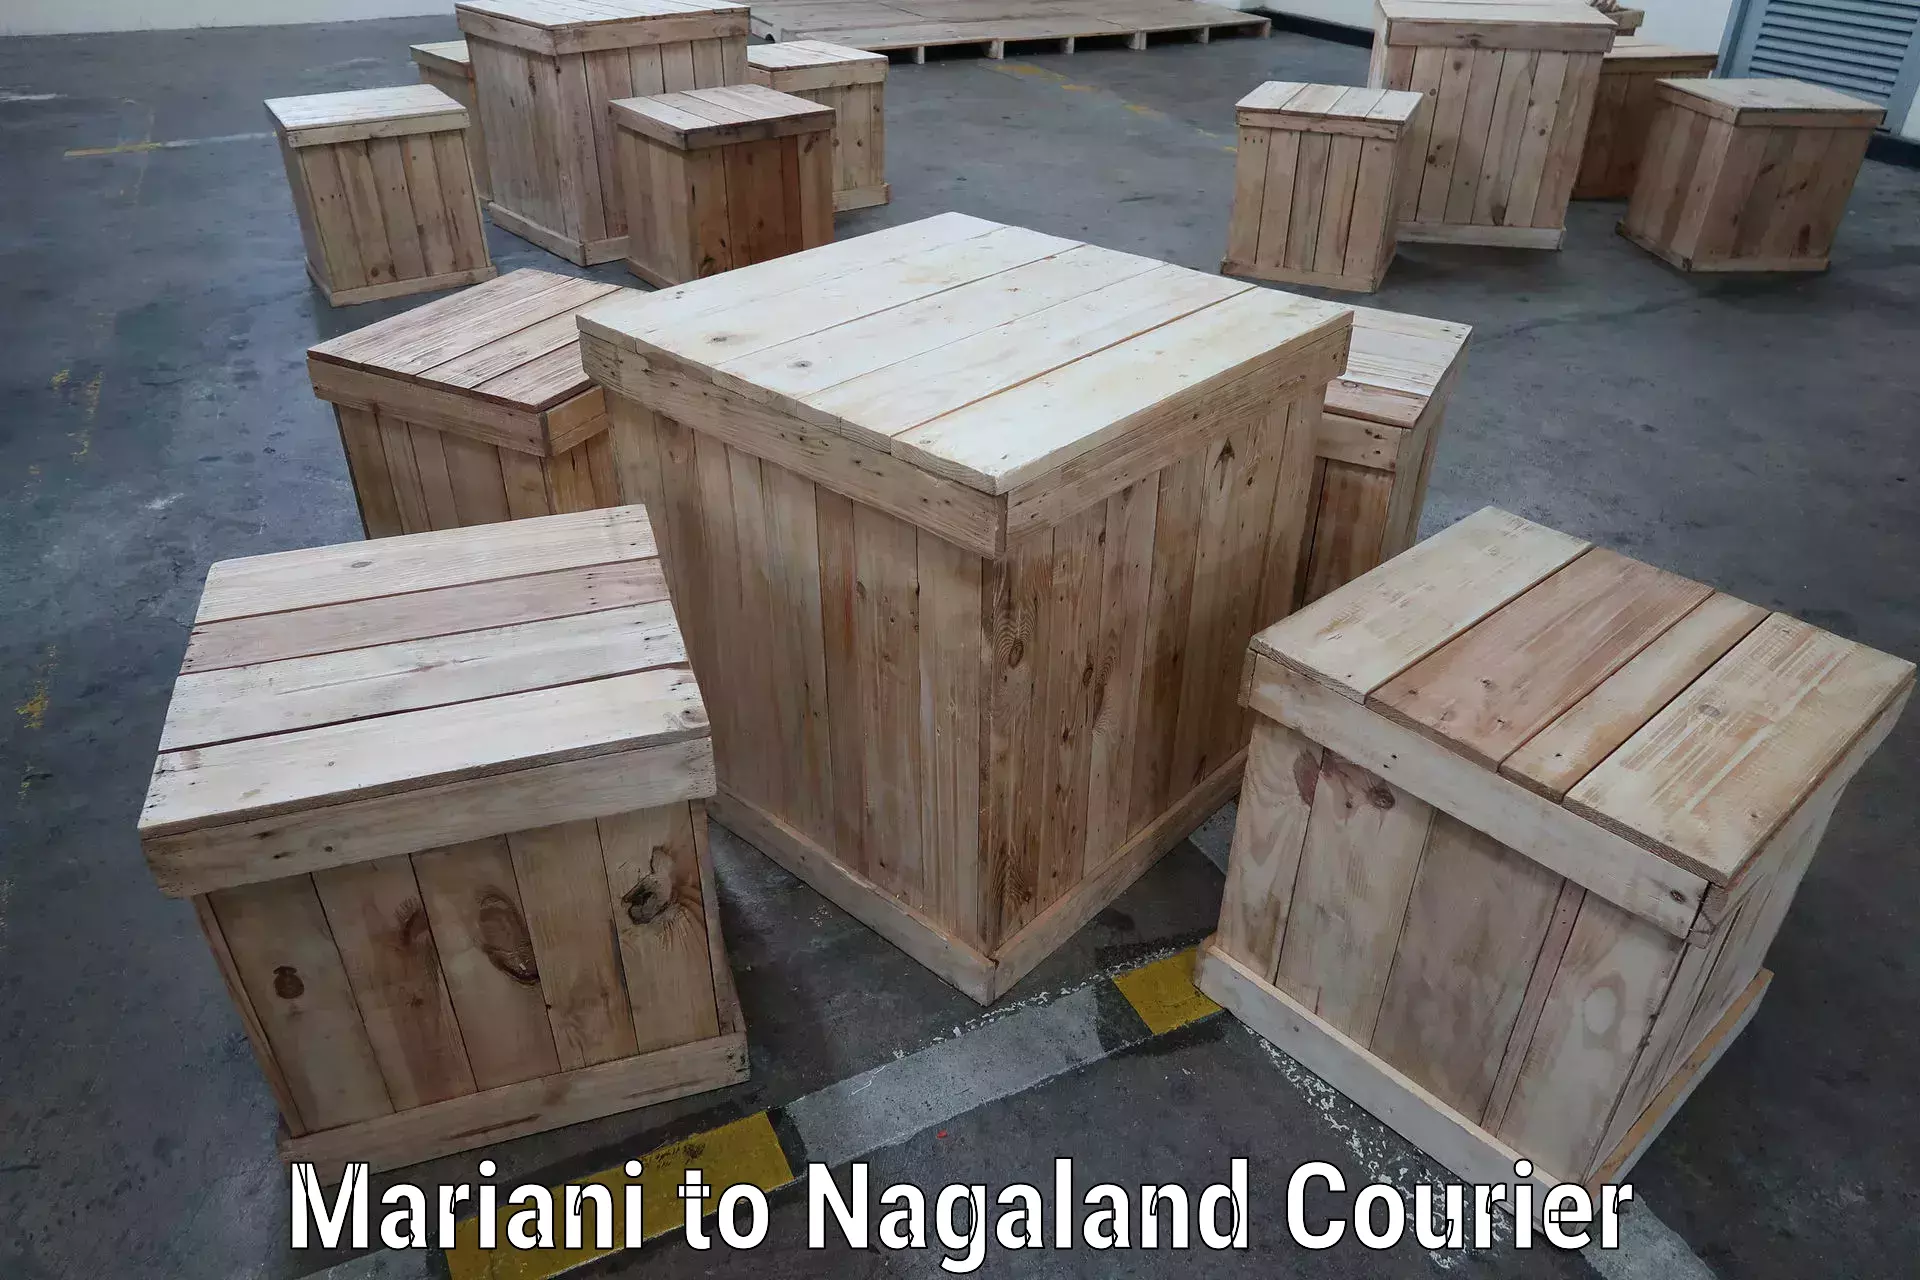 High-priority parcel service Mariani to Nagaland